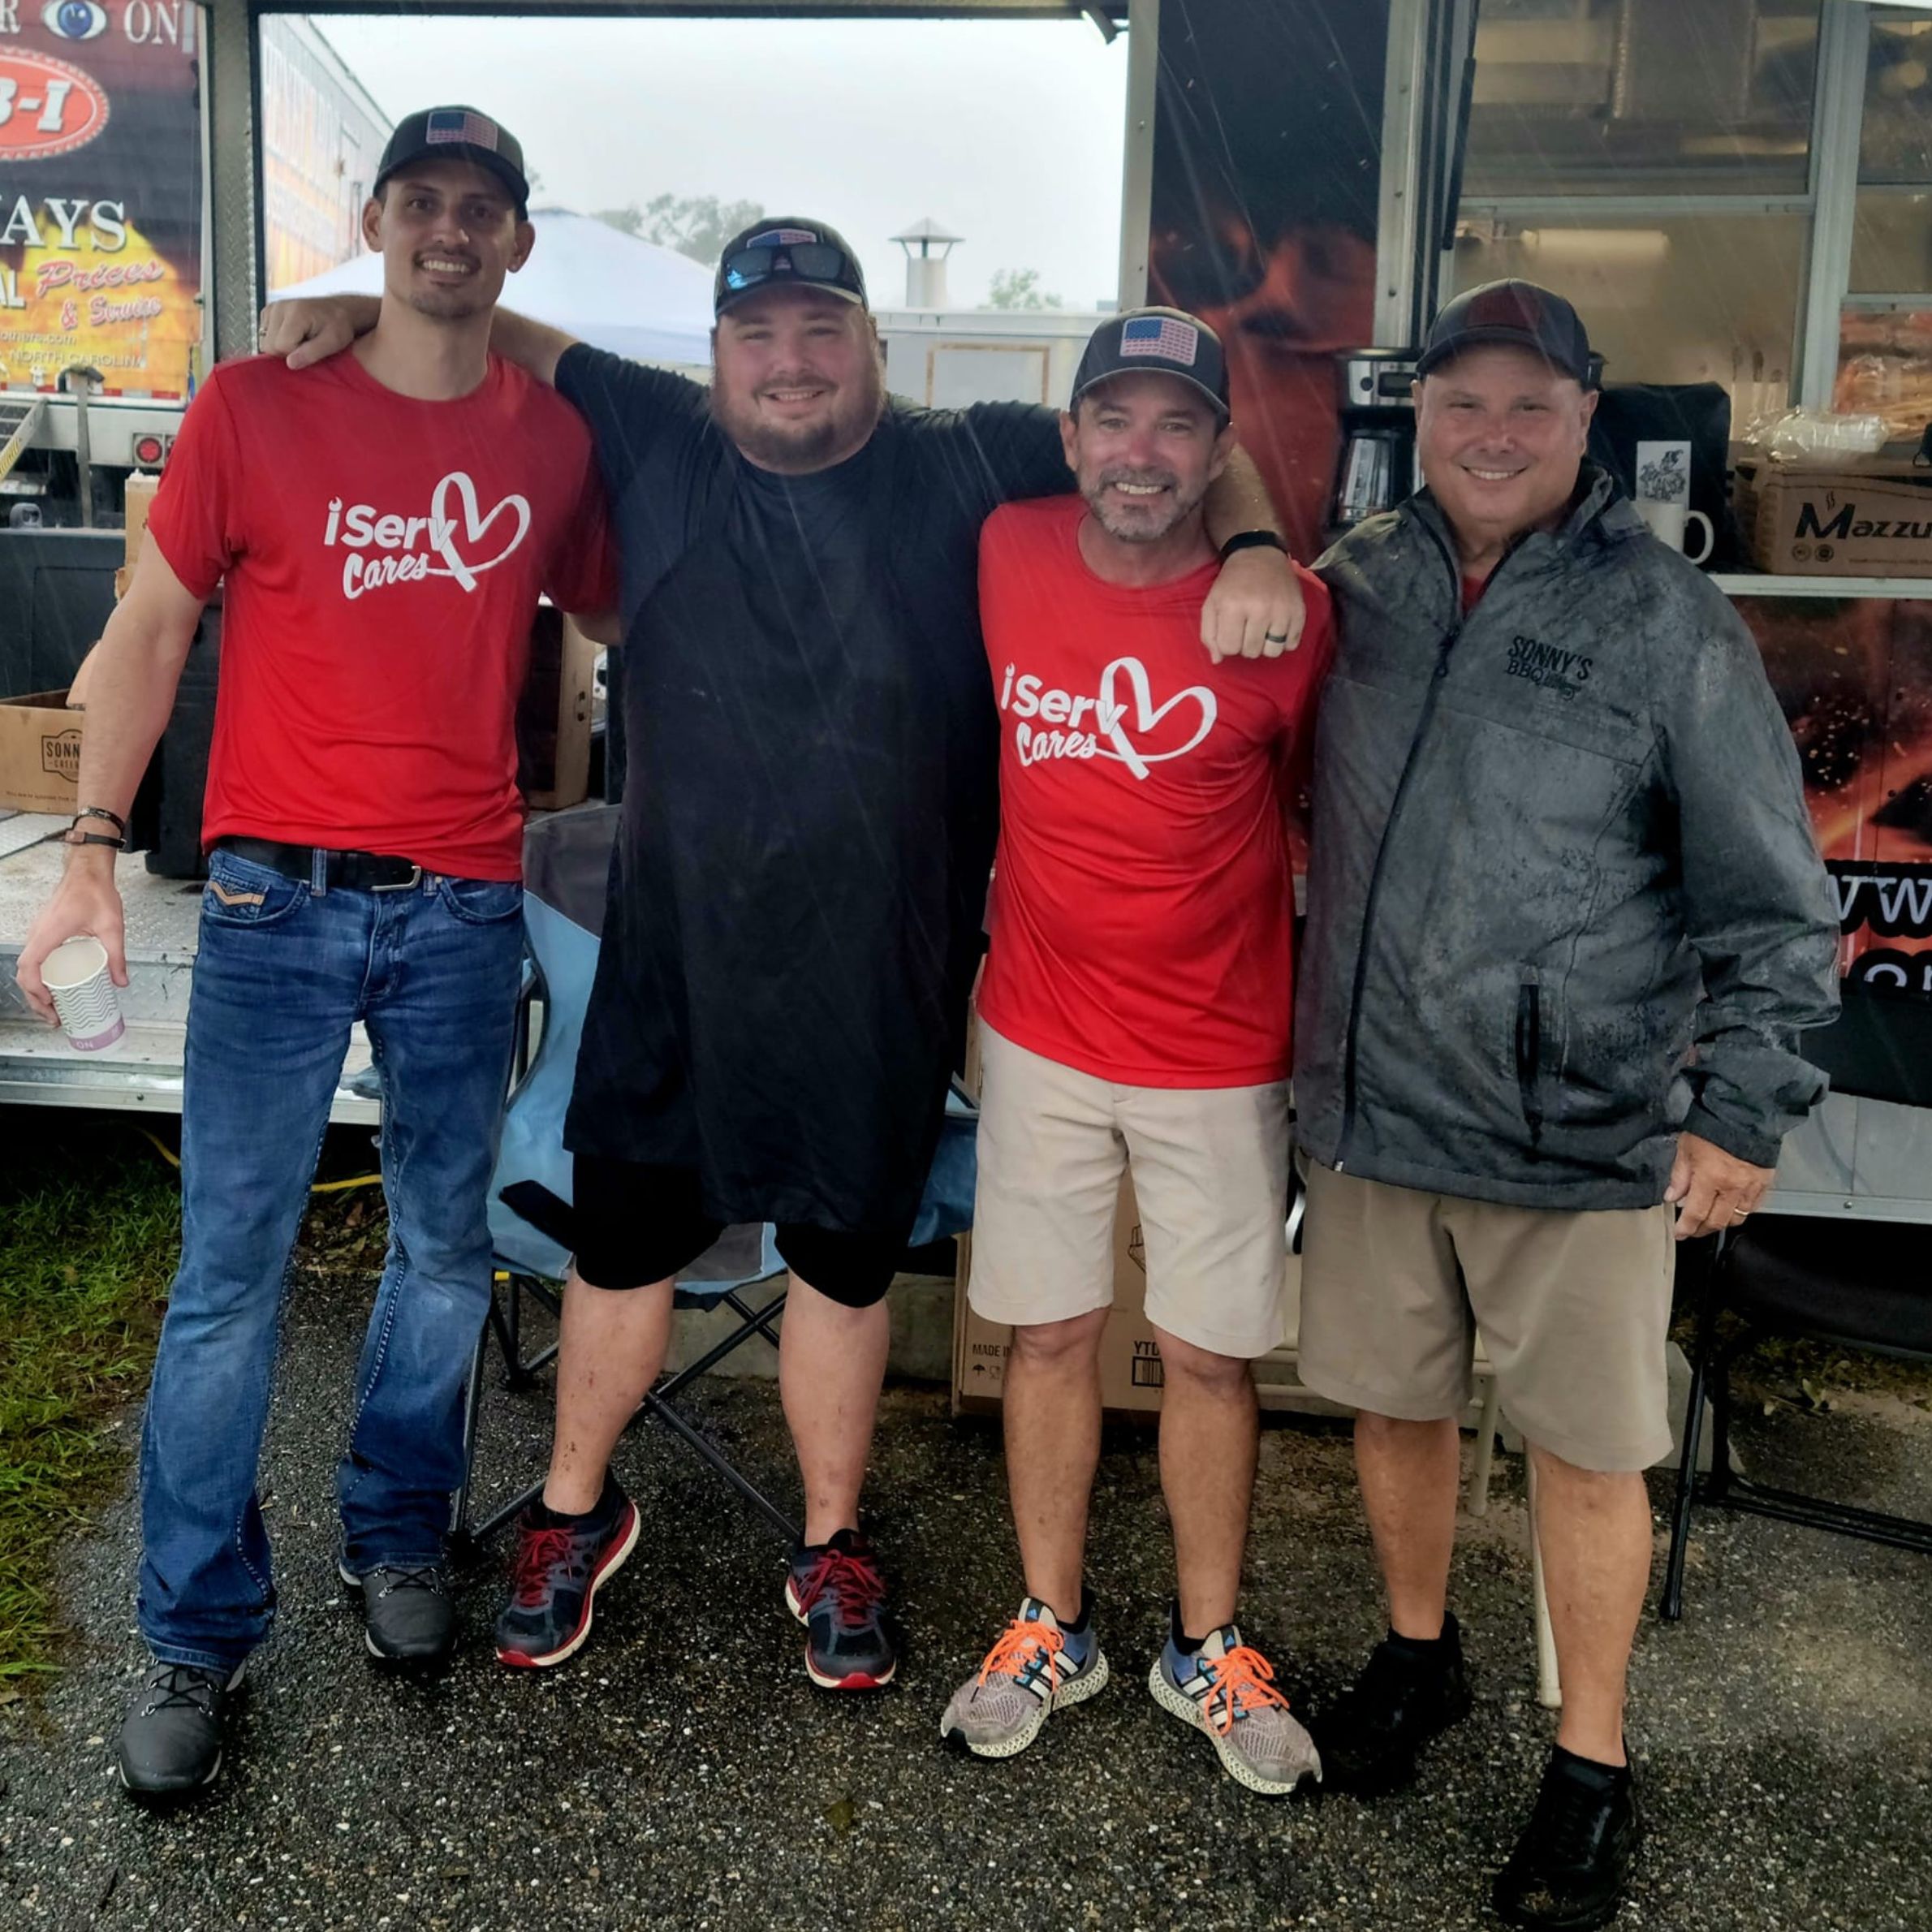 4 Members of the iServ Cares team smile as they cook up BBQ after Hurricane Idalia.